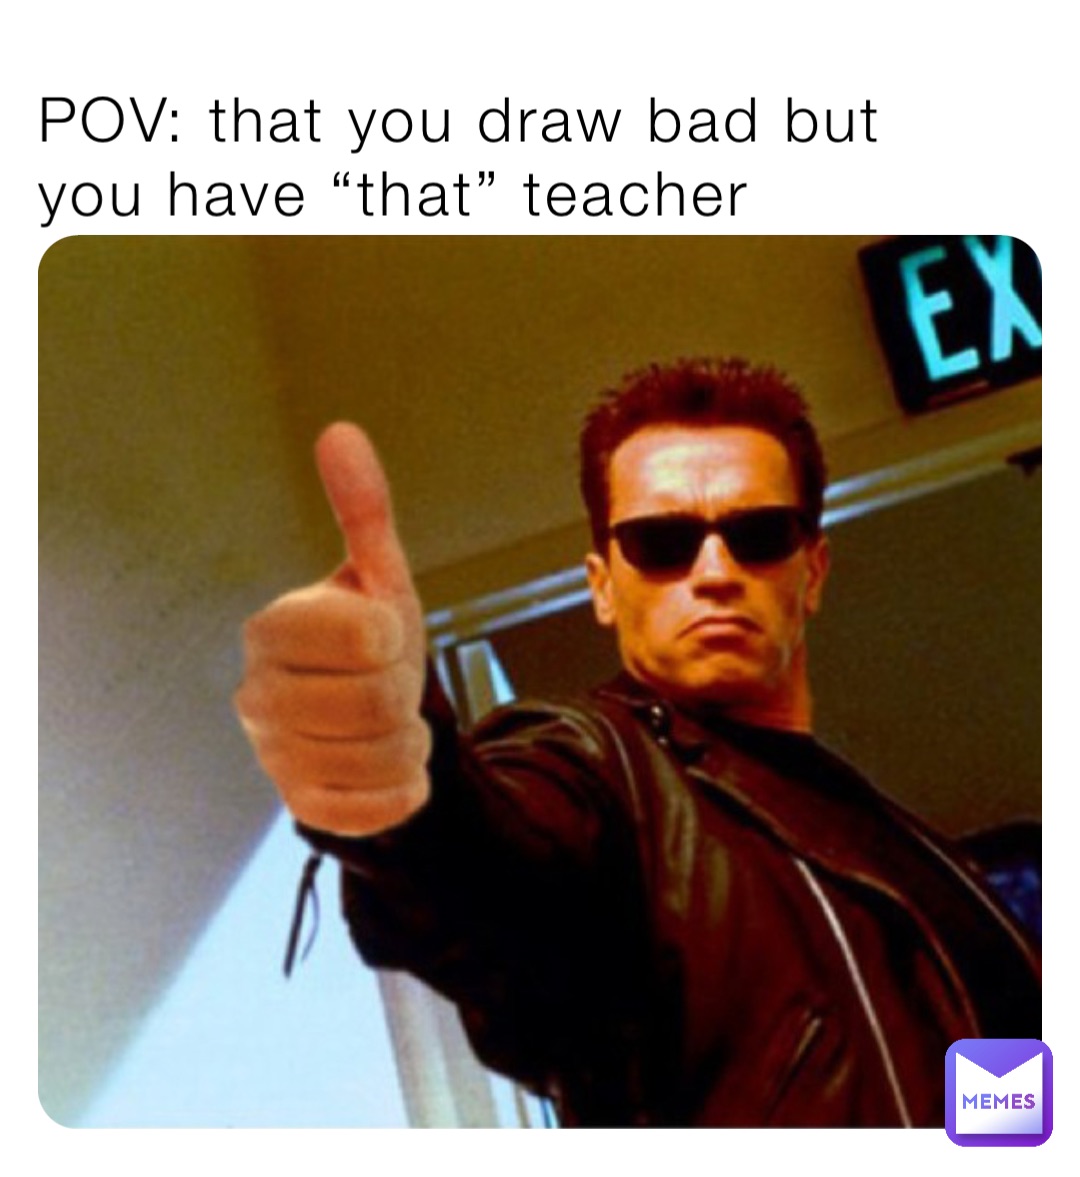 POV: that you draw bad but you have “that” teacher